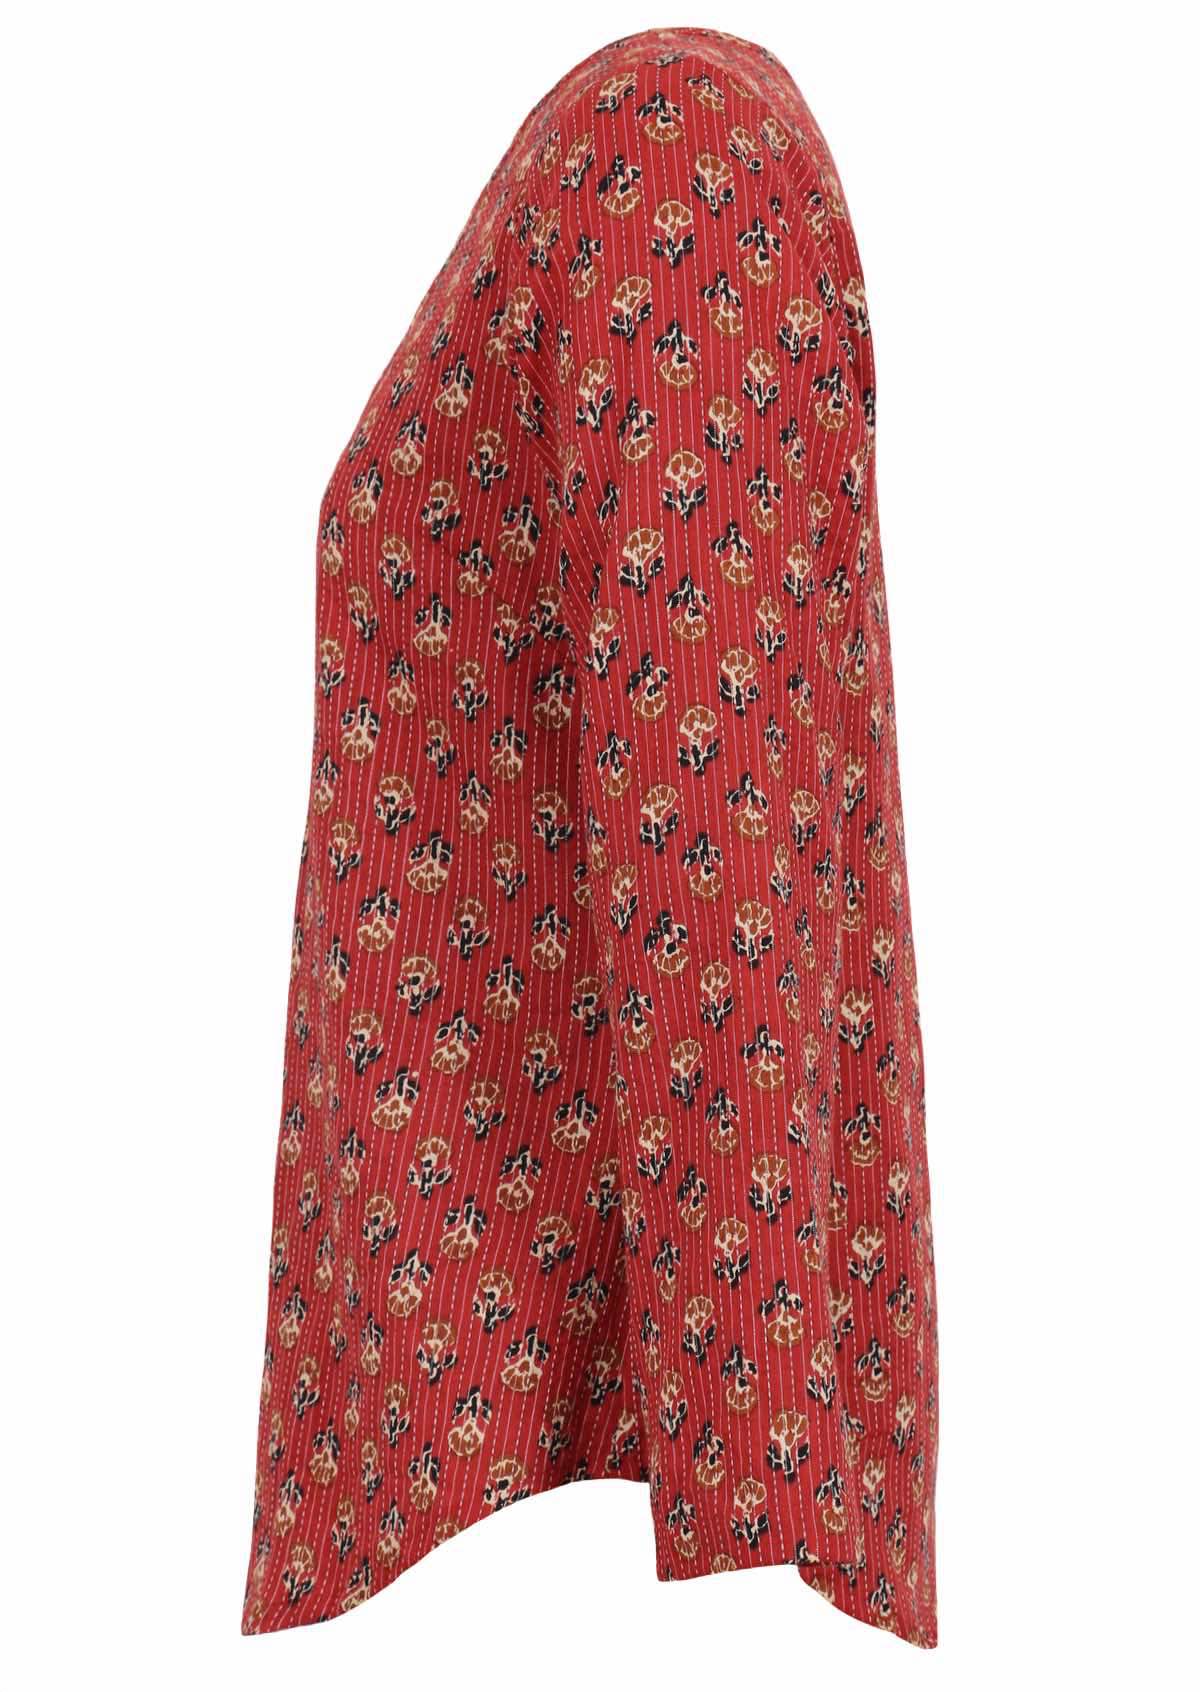 Deep red base with flowers and kantha stitches cotton